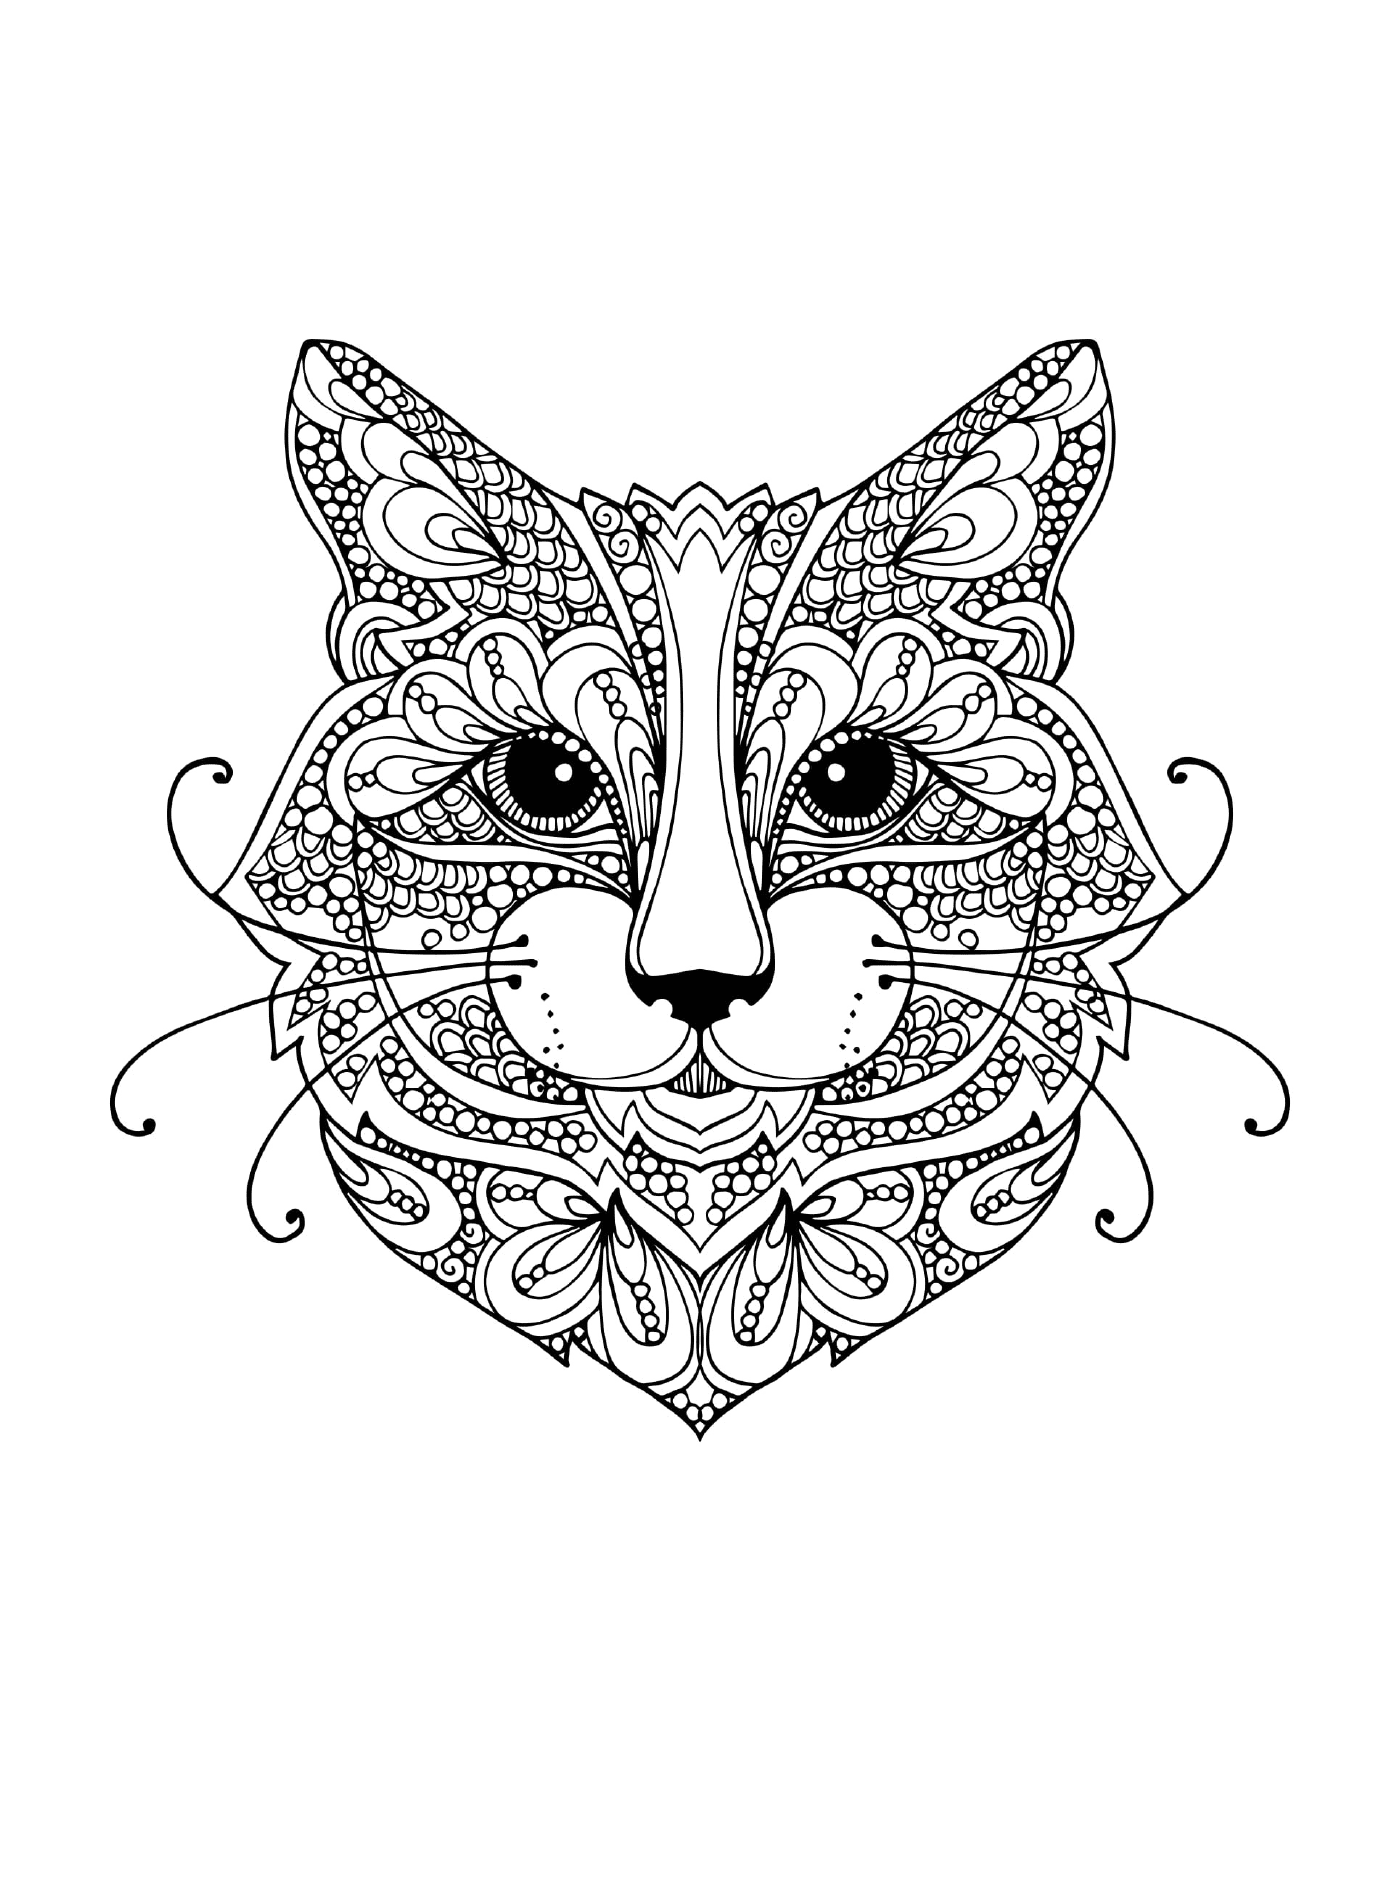  Cat with a floral pattern on her face 